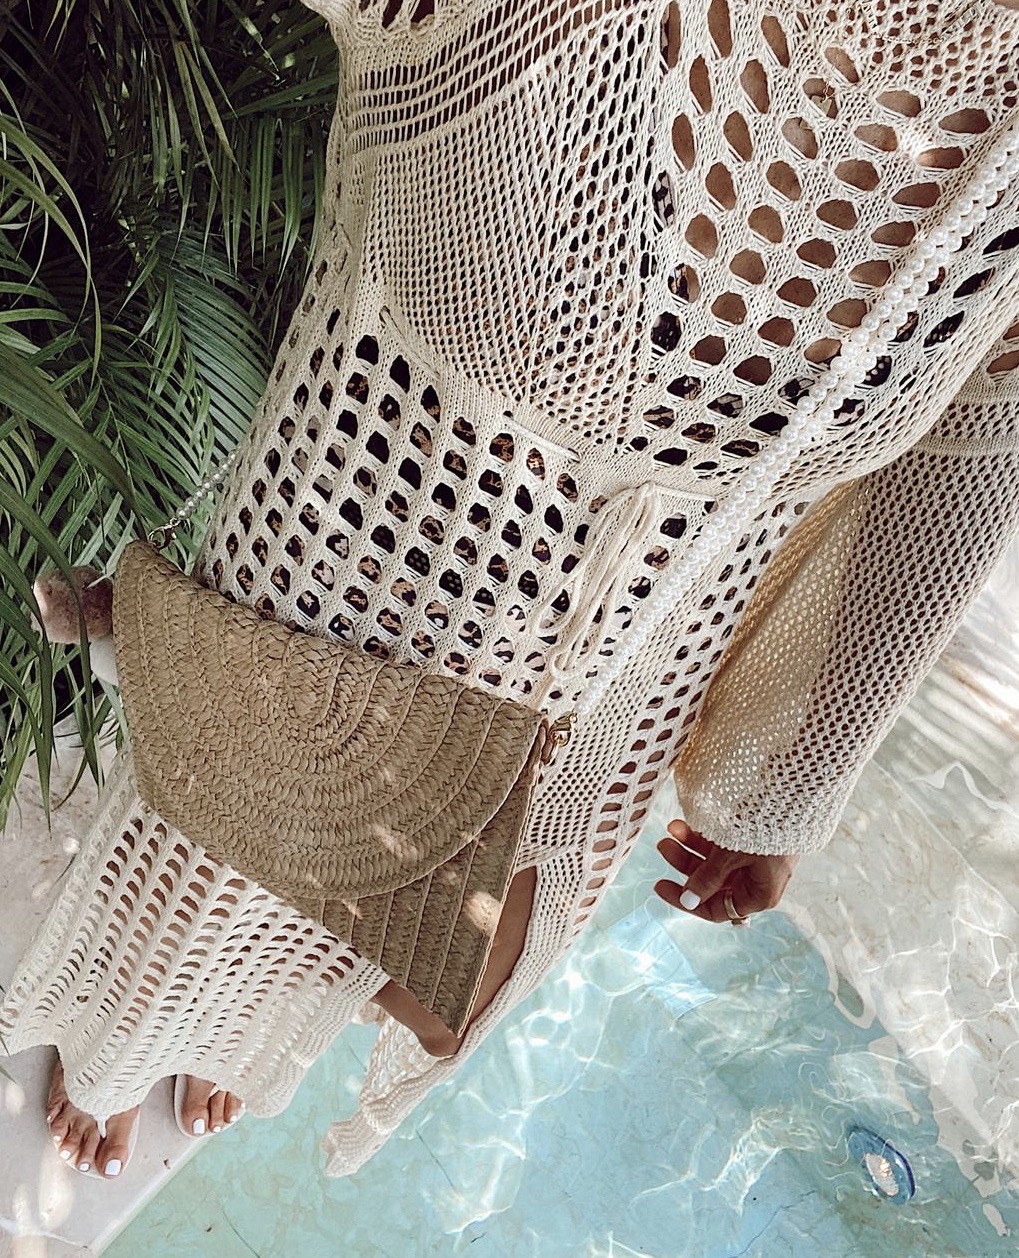 beach resort wear - Amazon knit see through tan beige swimsuit coverup dress with leg slit and bell sleeves